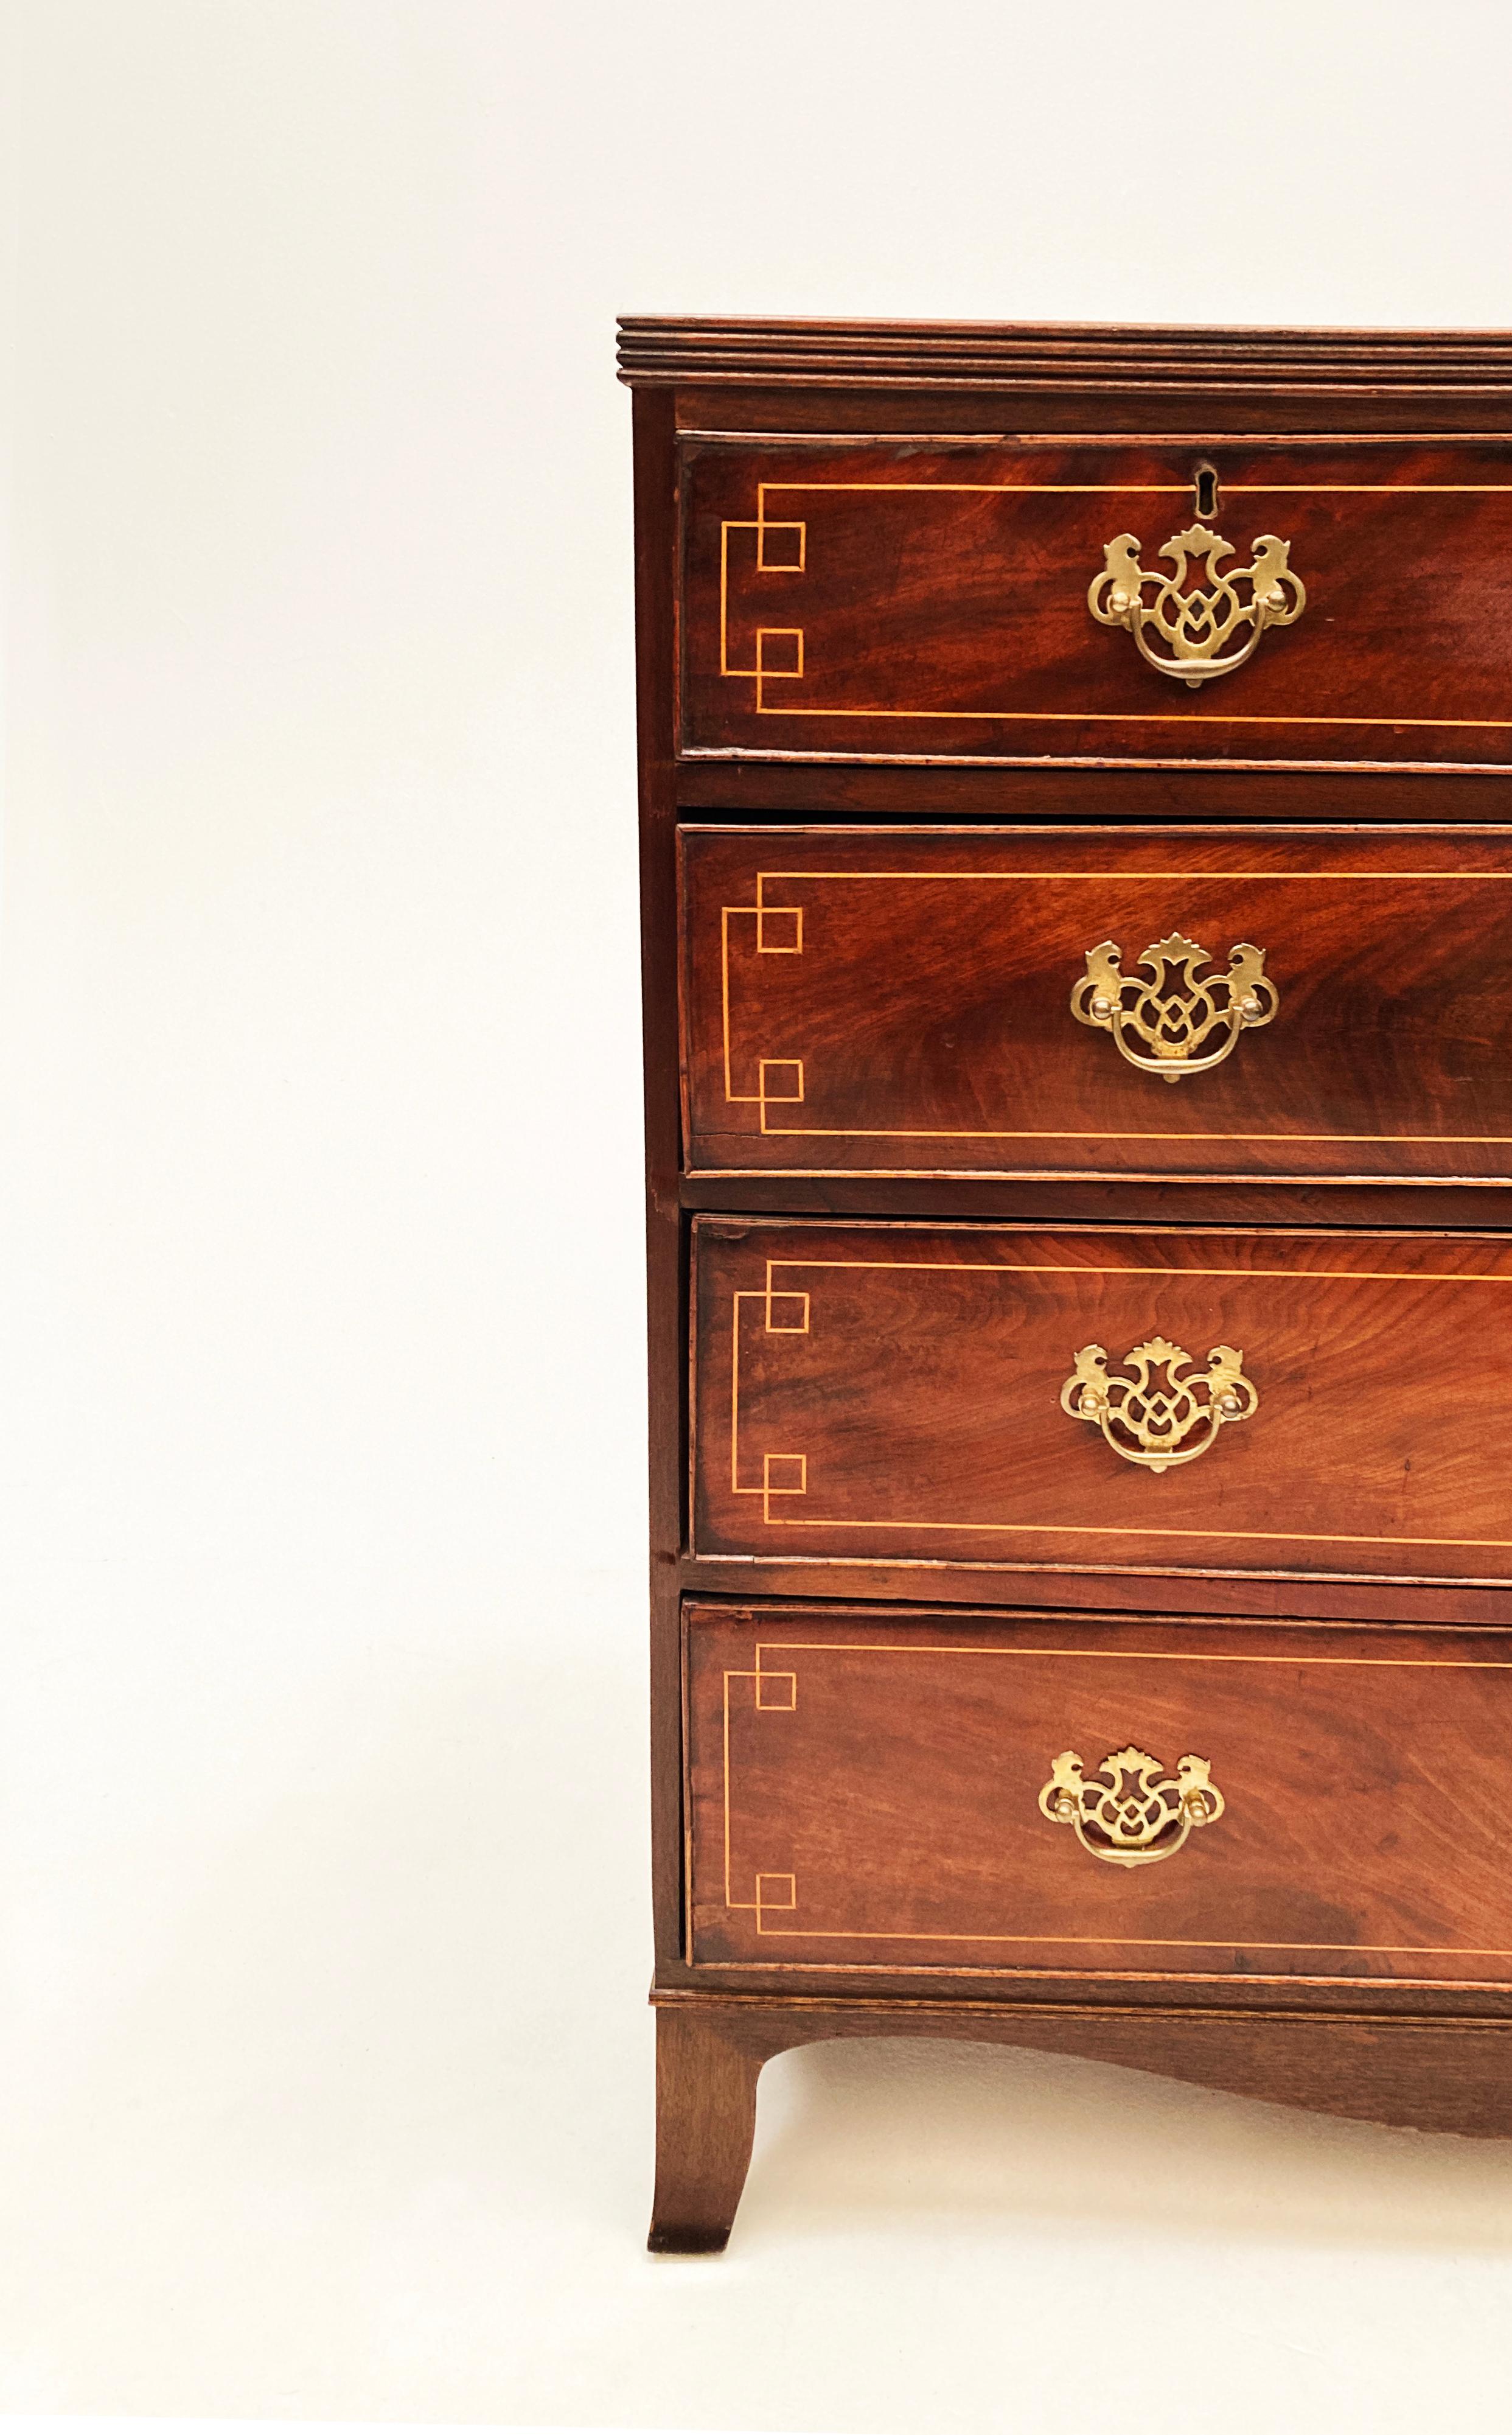 This is perhaps one of our favorite pieces and one of the most sophisticated and uniquely finished chests from the mid 18th century. An English - King George III, Hepplewhite flame mahogany five-drawer dresser with rosewood banded surface edge